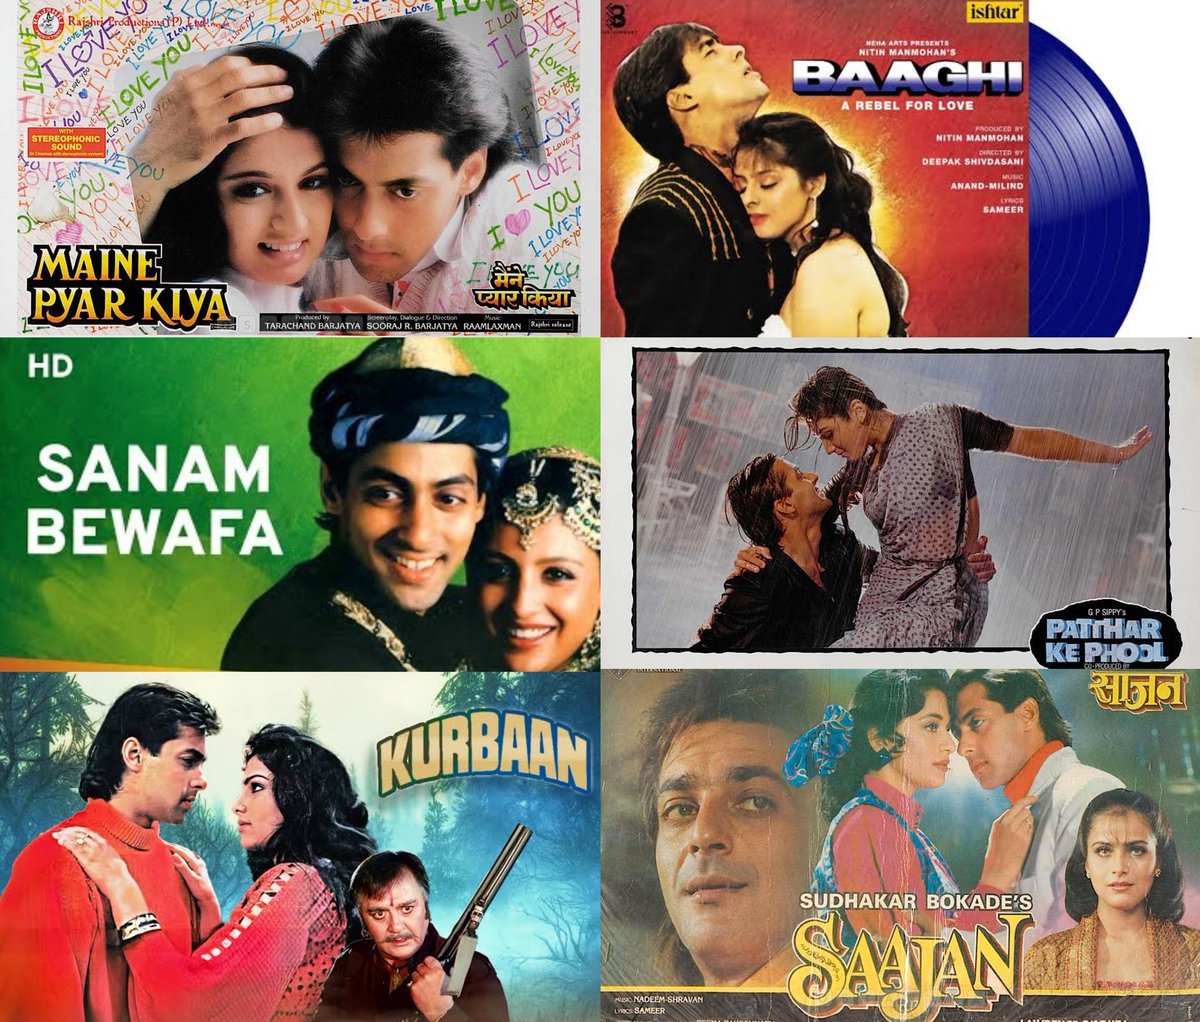 the Biggest Hit and Highest Grosser film of Indian Cinema in the 1980s Decade ; Baaghi was among Top10 Hits of 1990 ; Sanam Bewafa Emerged a Huge Hit, even Amitabh's #Hum which released after 2 weeks failed to cross it ; Patthar ke Phool & Kurbaan were smash hits and Lastly (8/9)